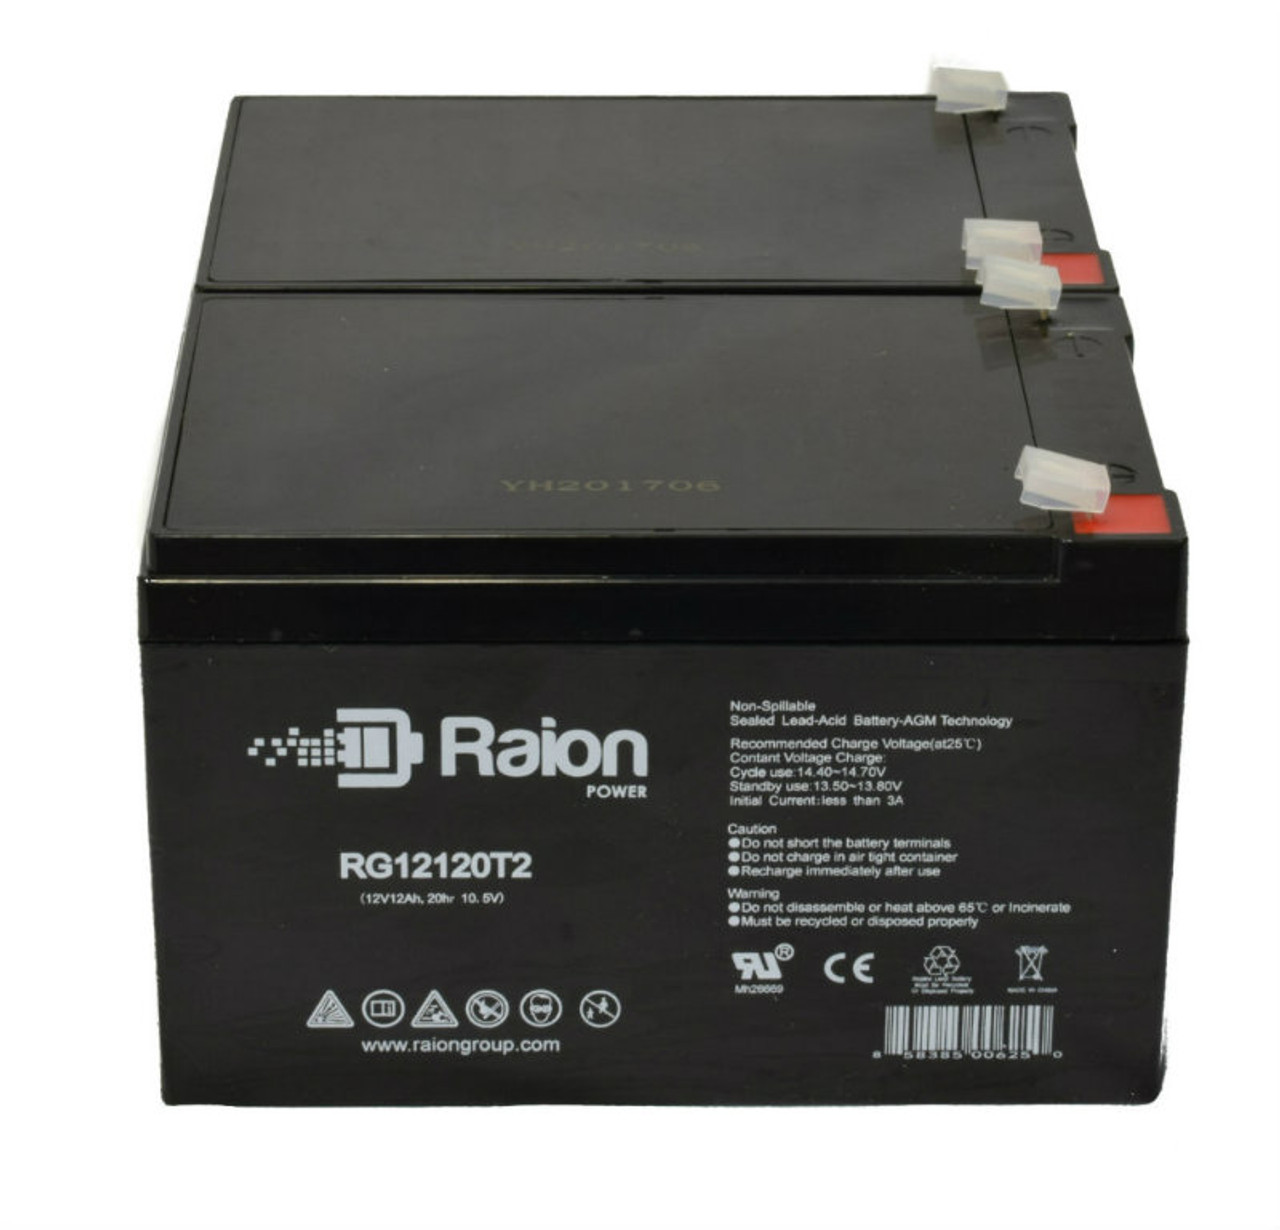 Raion Power RG12120T2 Replacement Fire Alarm Control Panel Battery for Altronix MAXIM7 - 2 Pack